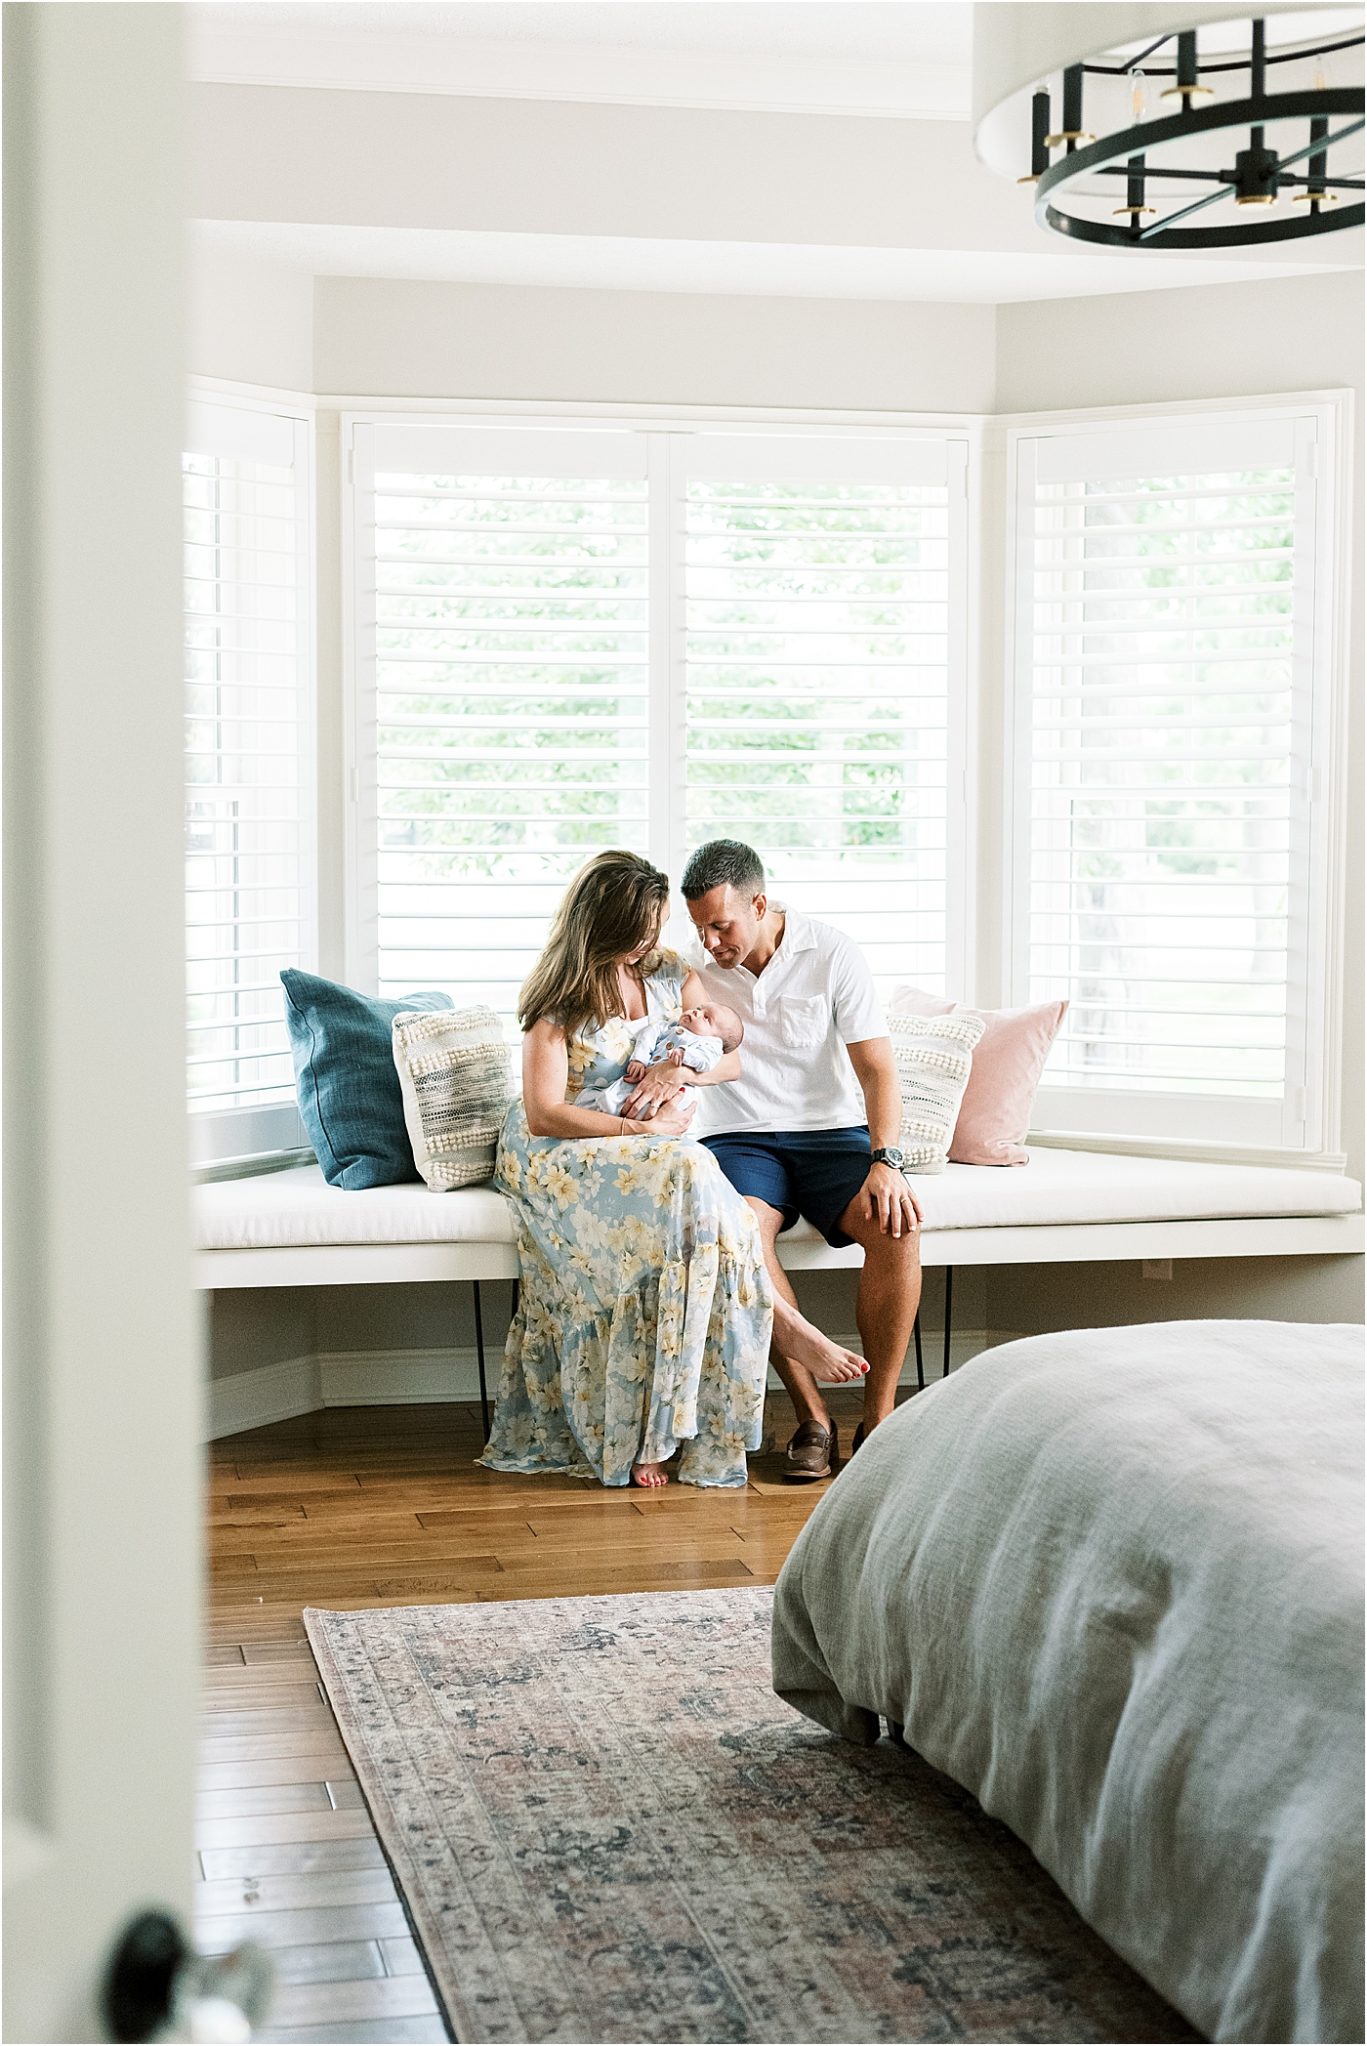 In-home lifestyle session with parents in master bedroom. Parents are holding their newborn son. Photo by Lindsay Konopa Photography.